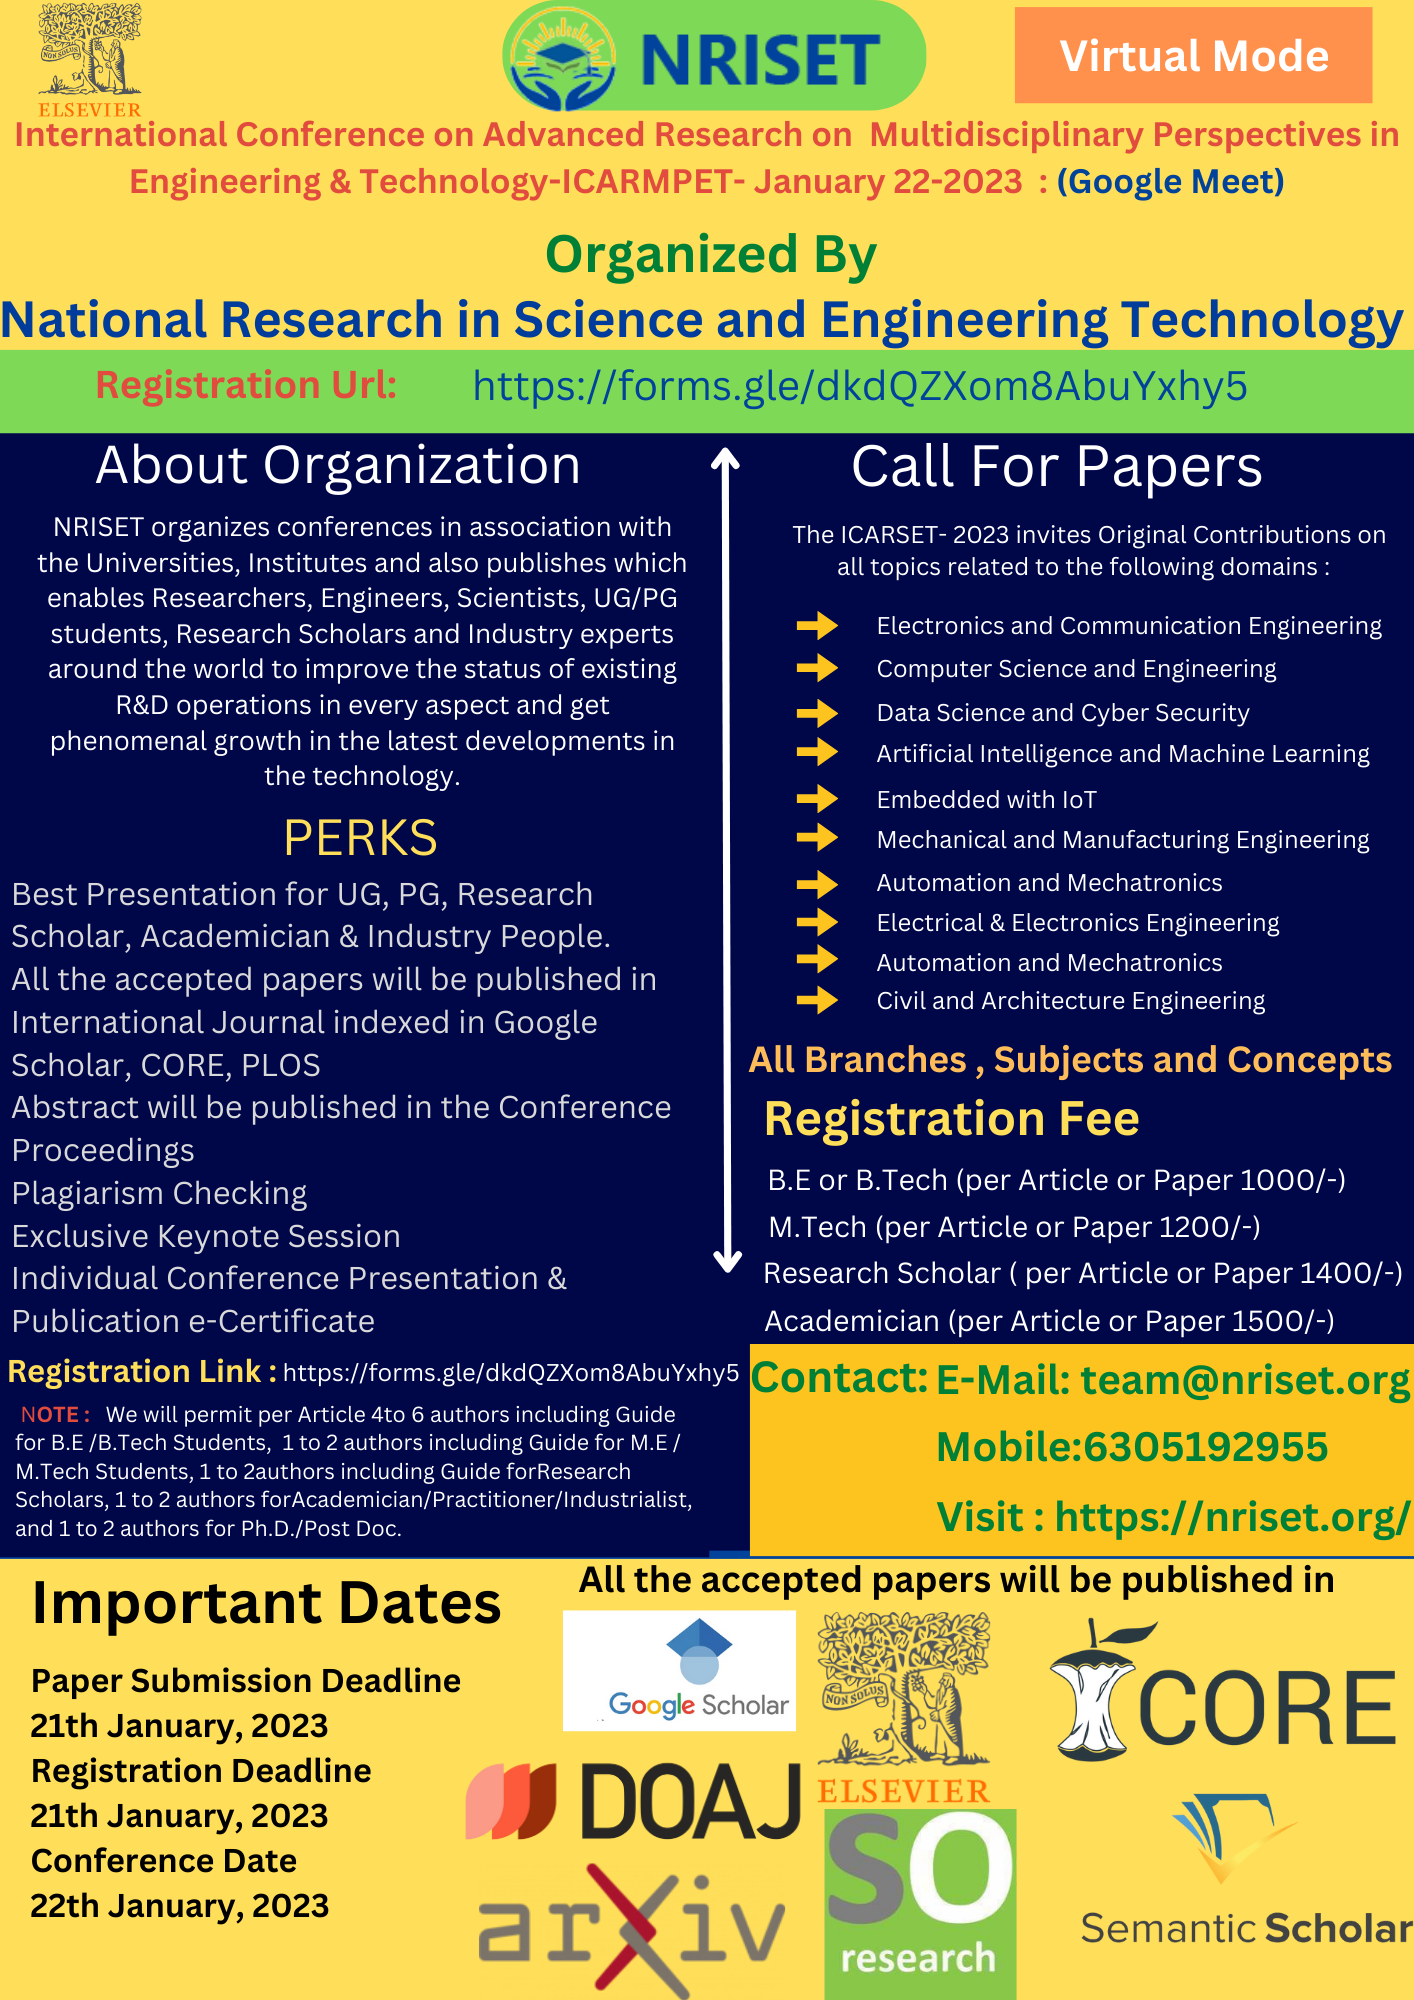 International Conference on Advanced Research on Multidisciplinary Perspectives in Engineering and Technology ICARMPET 2023